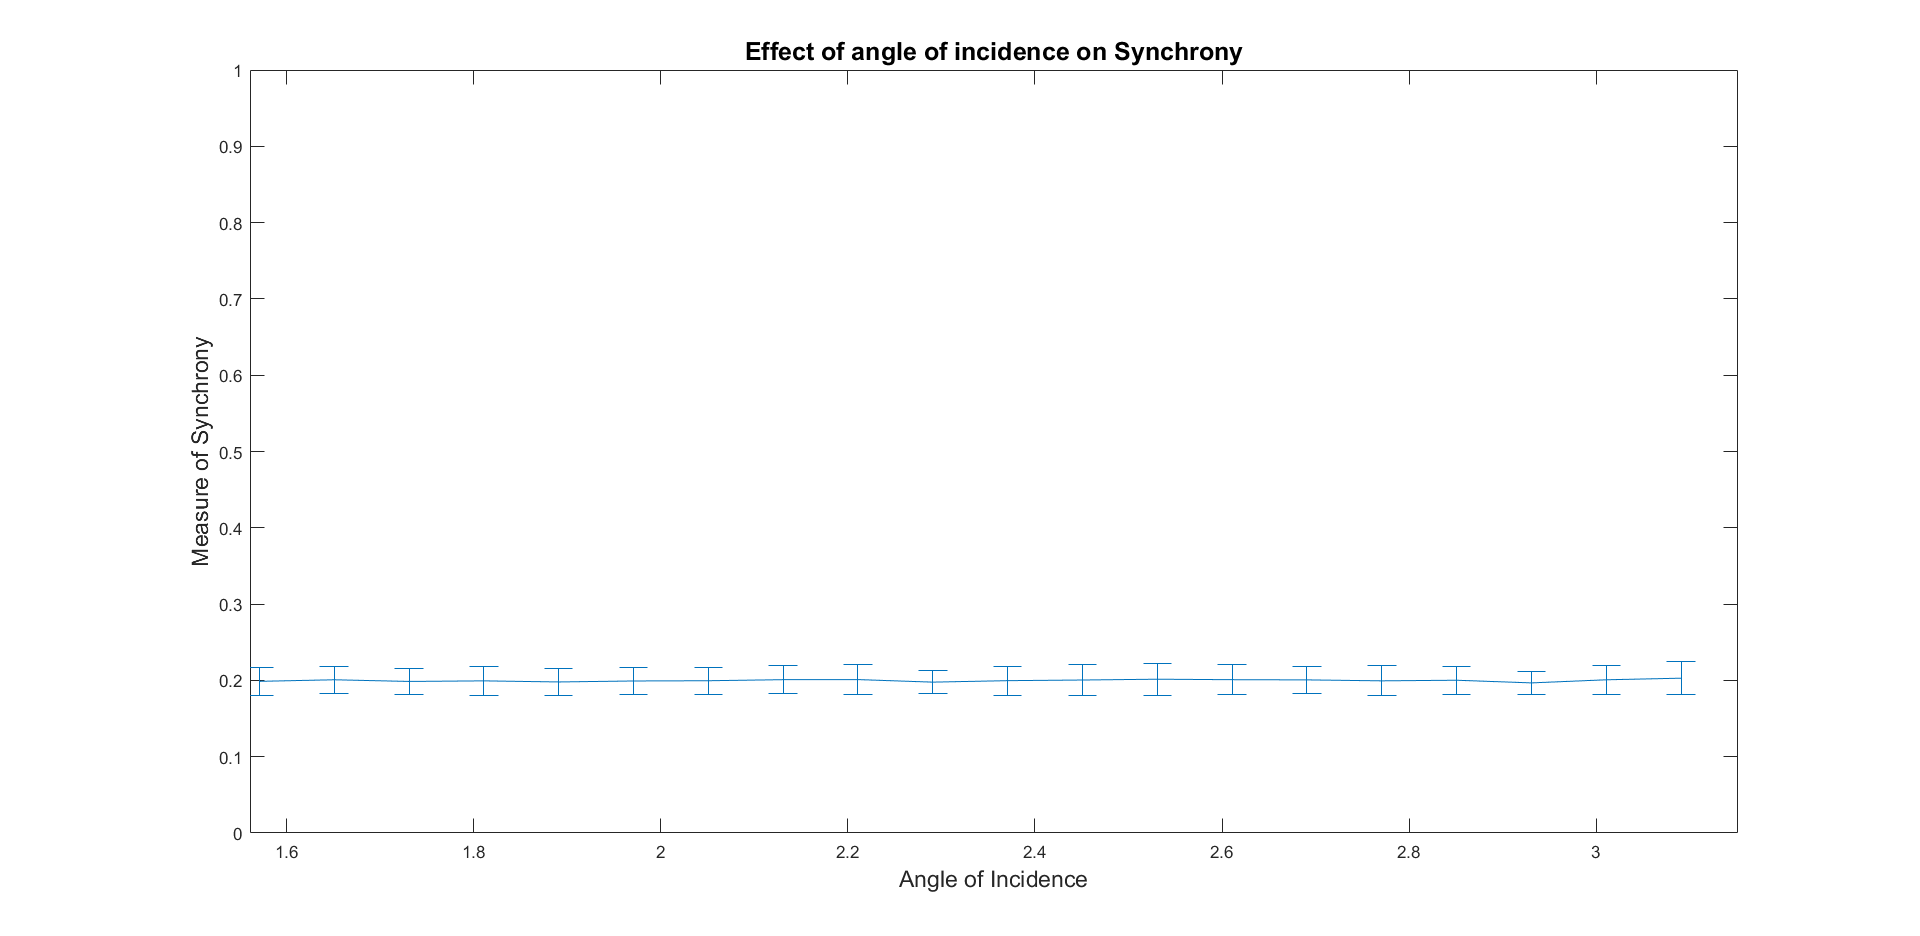 Graph of the angle of incidence's effect on synchrony.